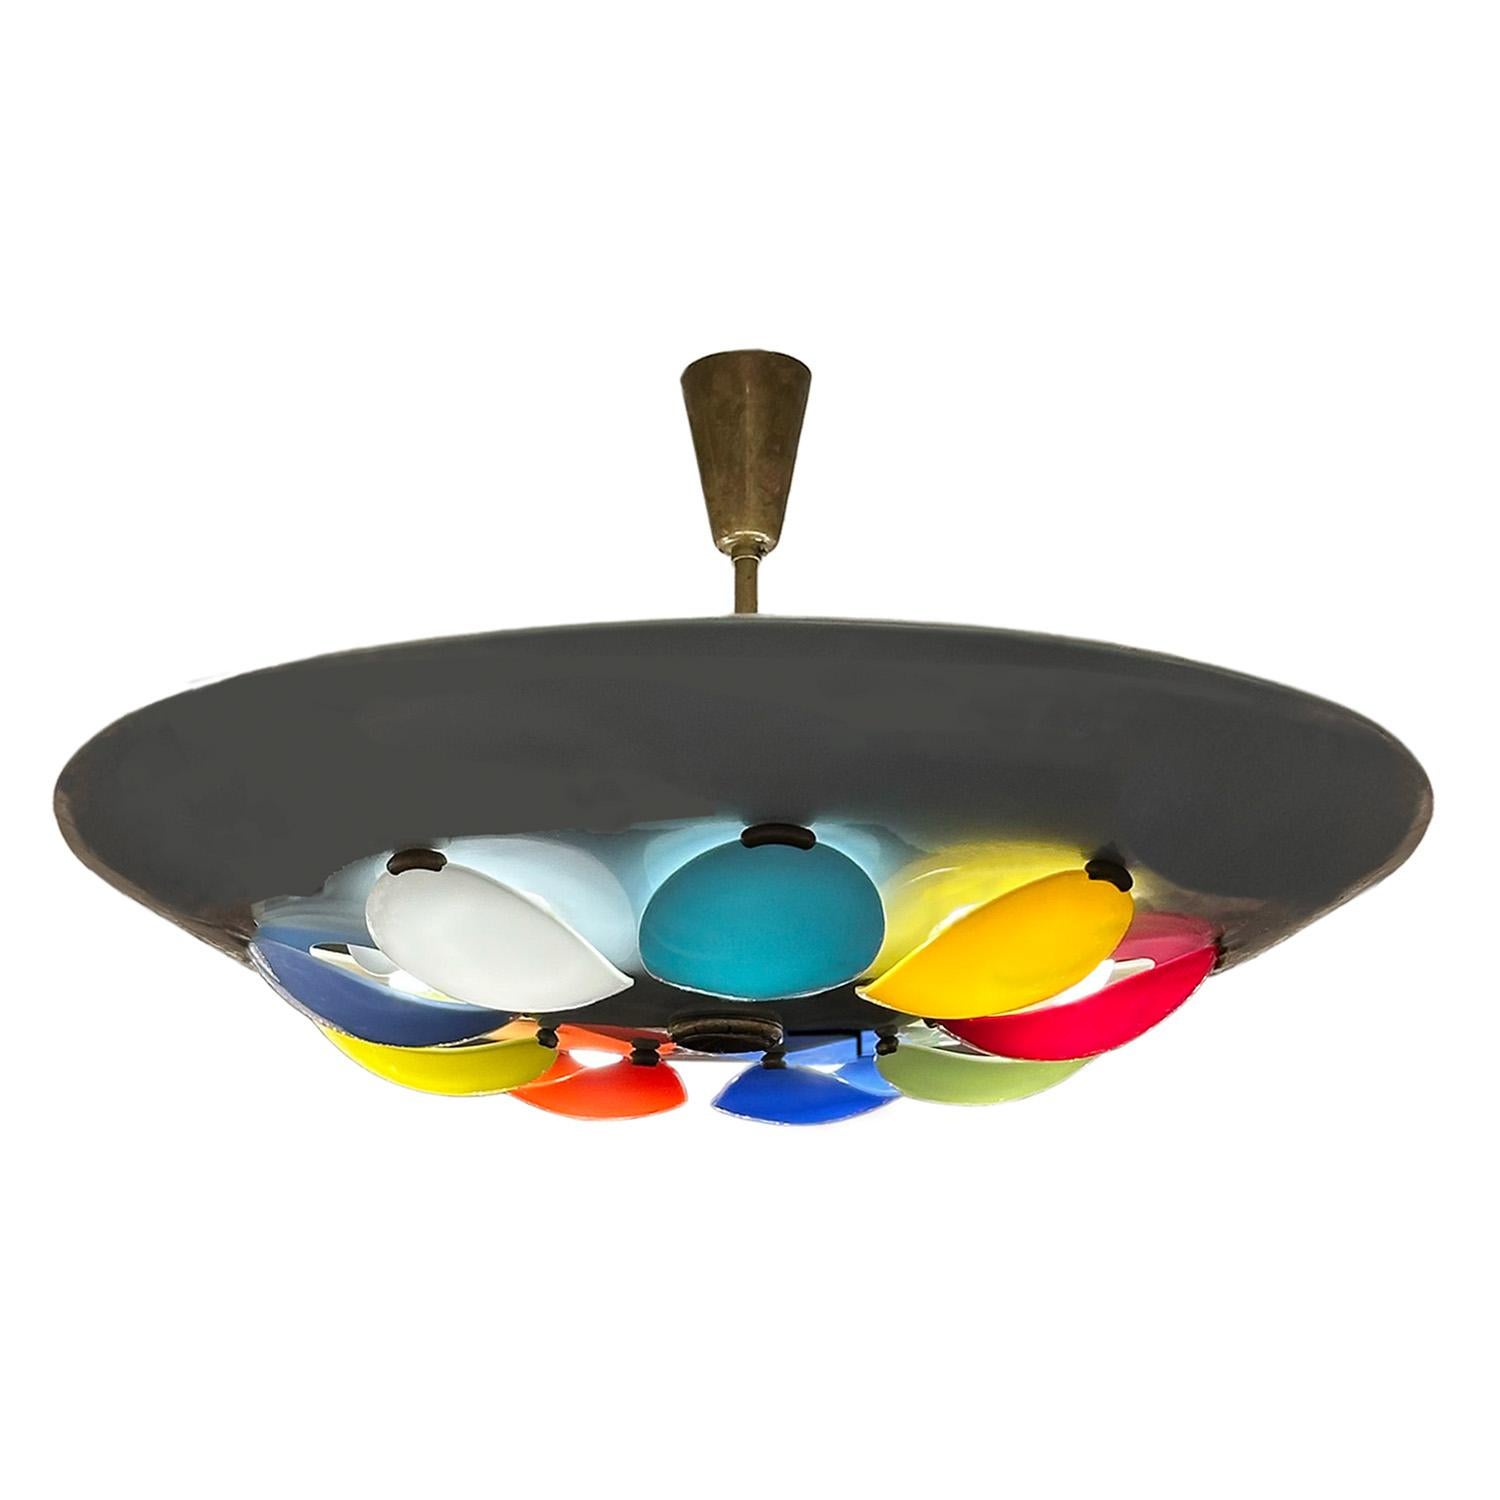 Rare gray painted aluminum saucer shaped pendant light with colorful acrylic diffusers supported by a brass stem and canopy. Designed by Angelo Lelii for Arredoluce. Italy, 1955.